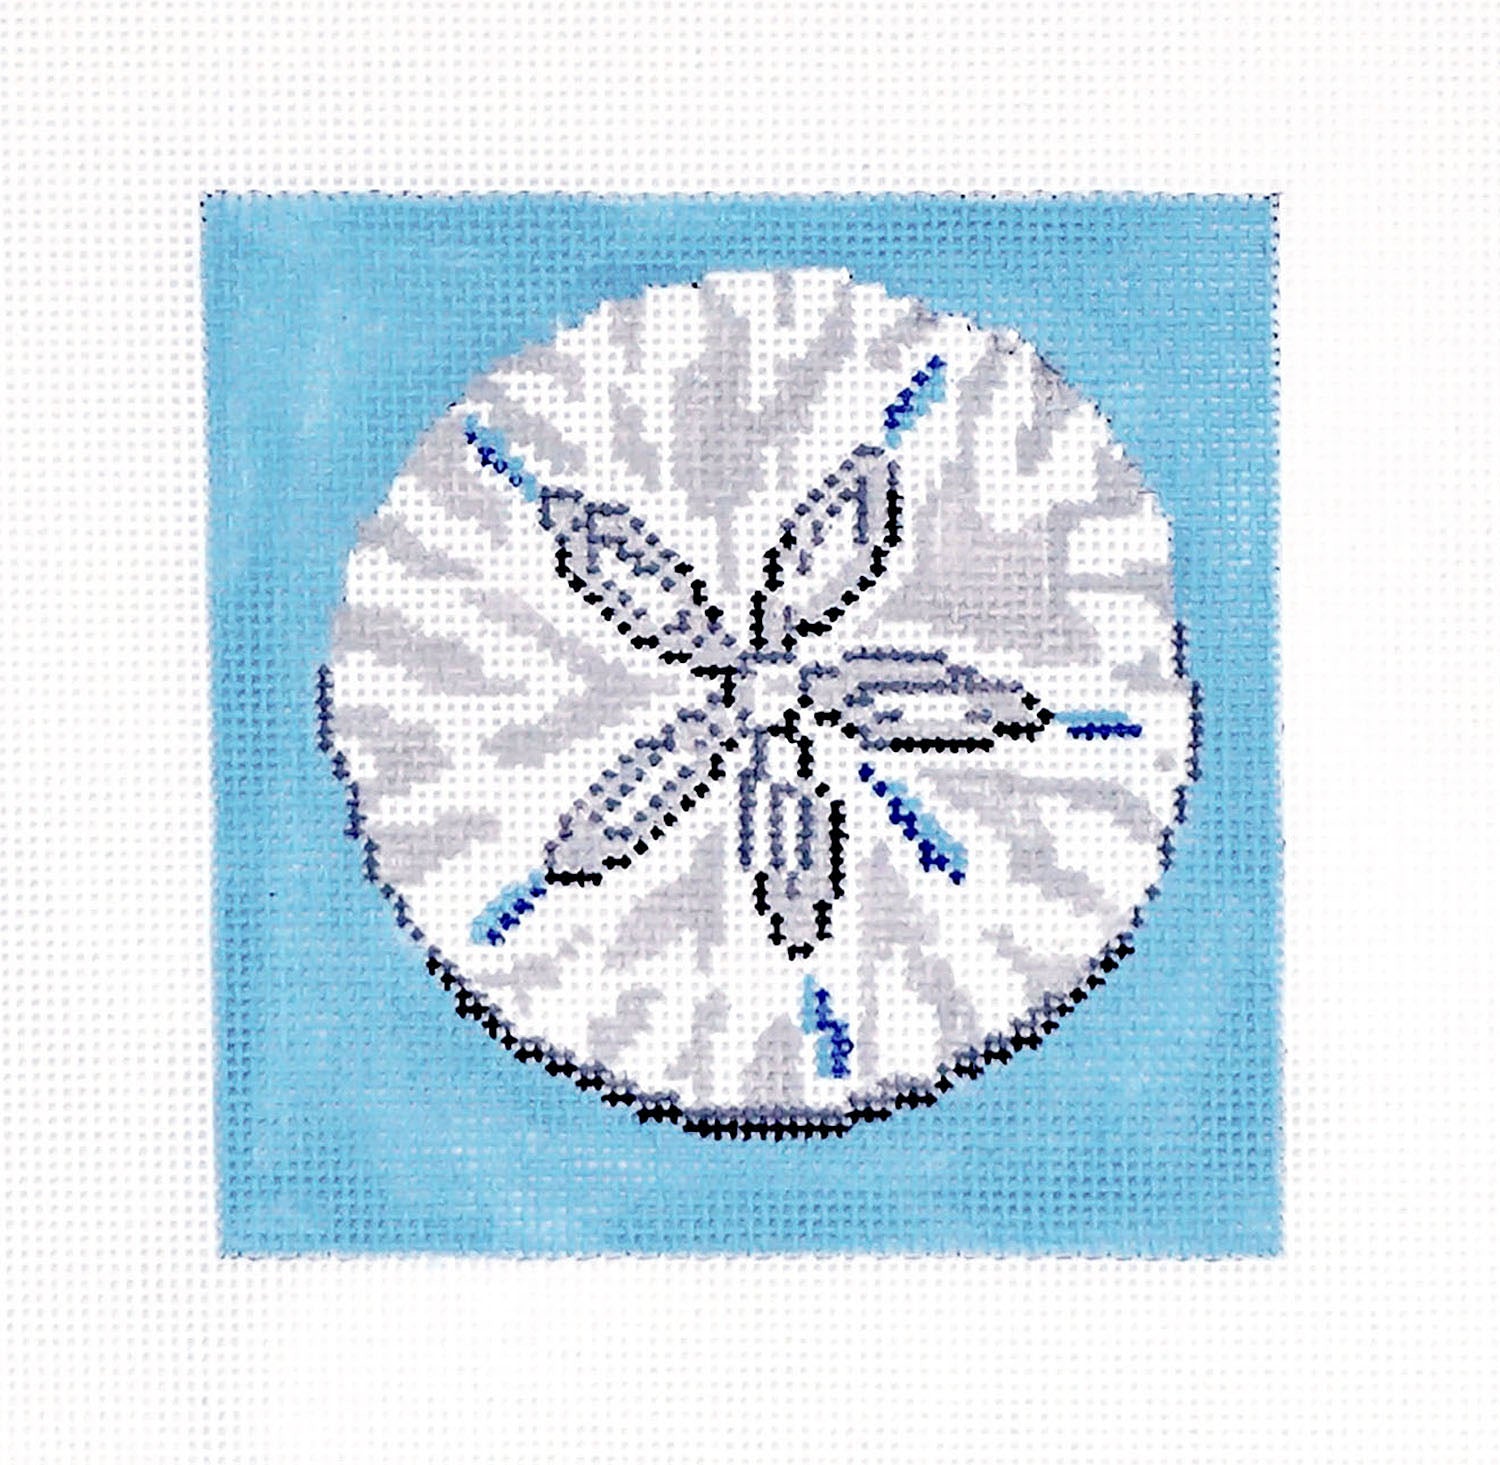 Seaside Canvas ~ White Sand Dollar on Blue 18 Mesh handpainted 4 Sq.  Needlepoint Canvas by Needle Crossings